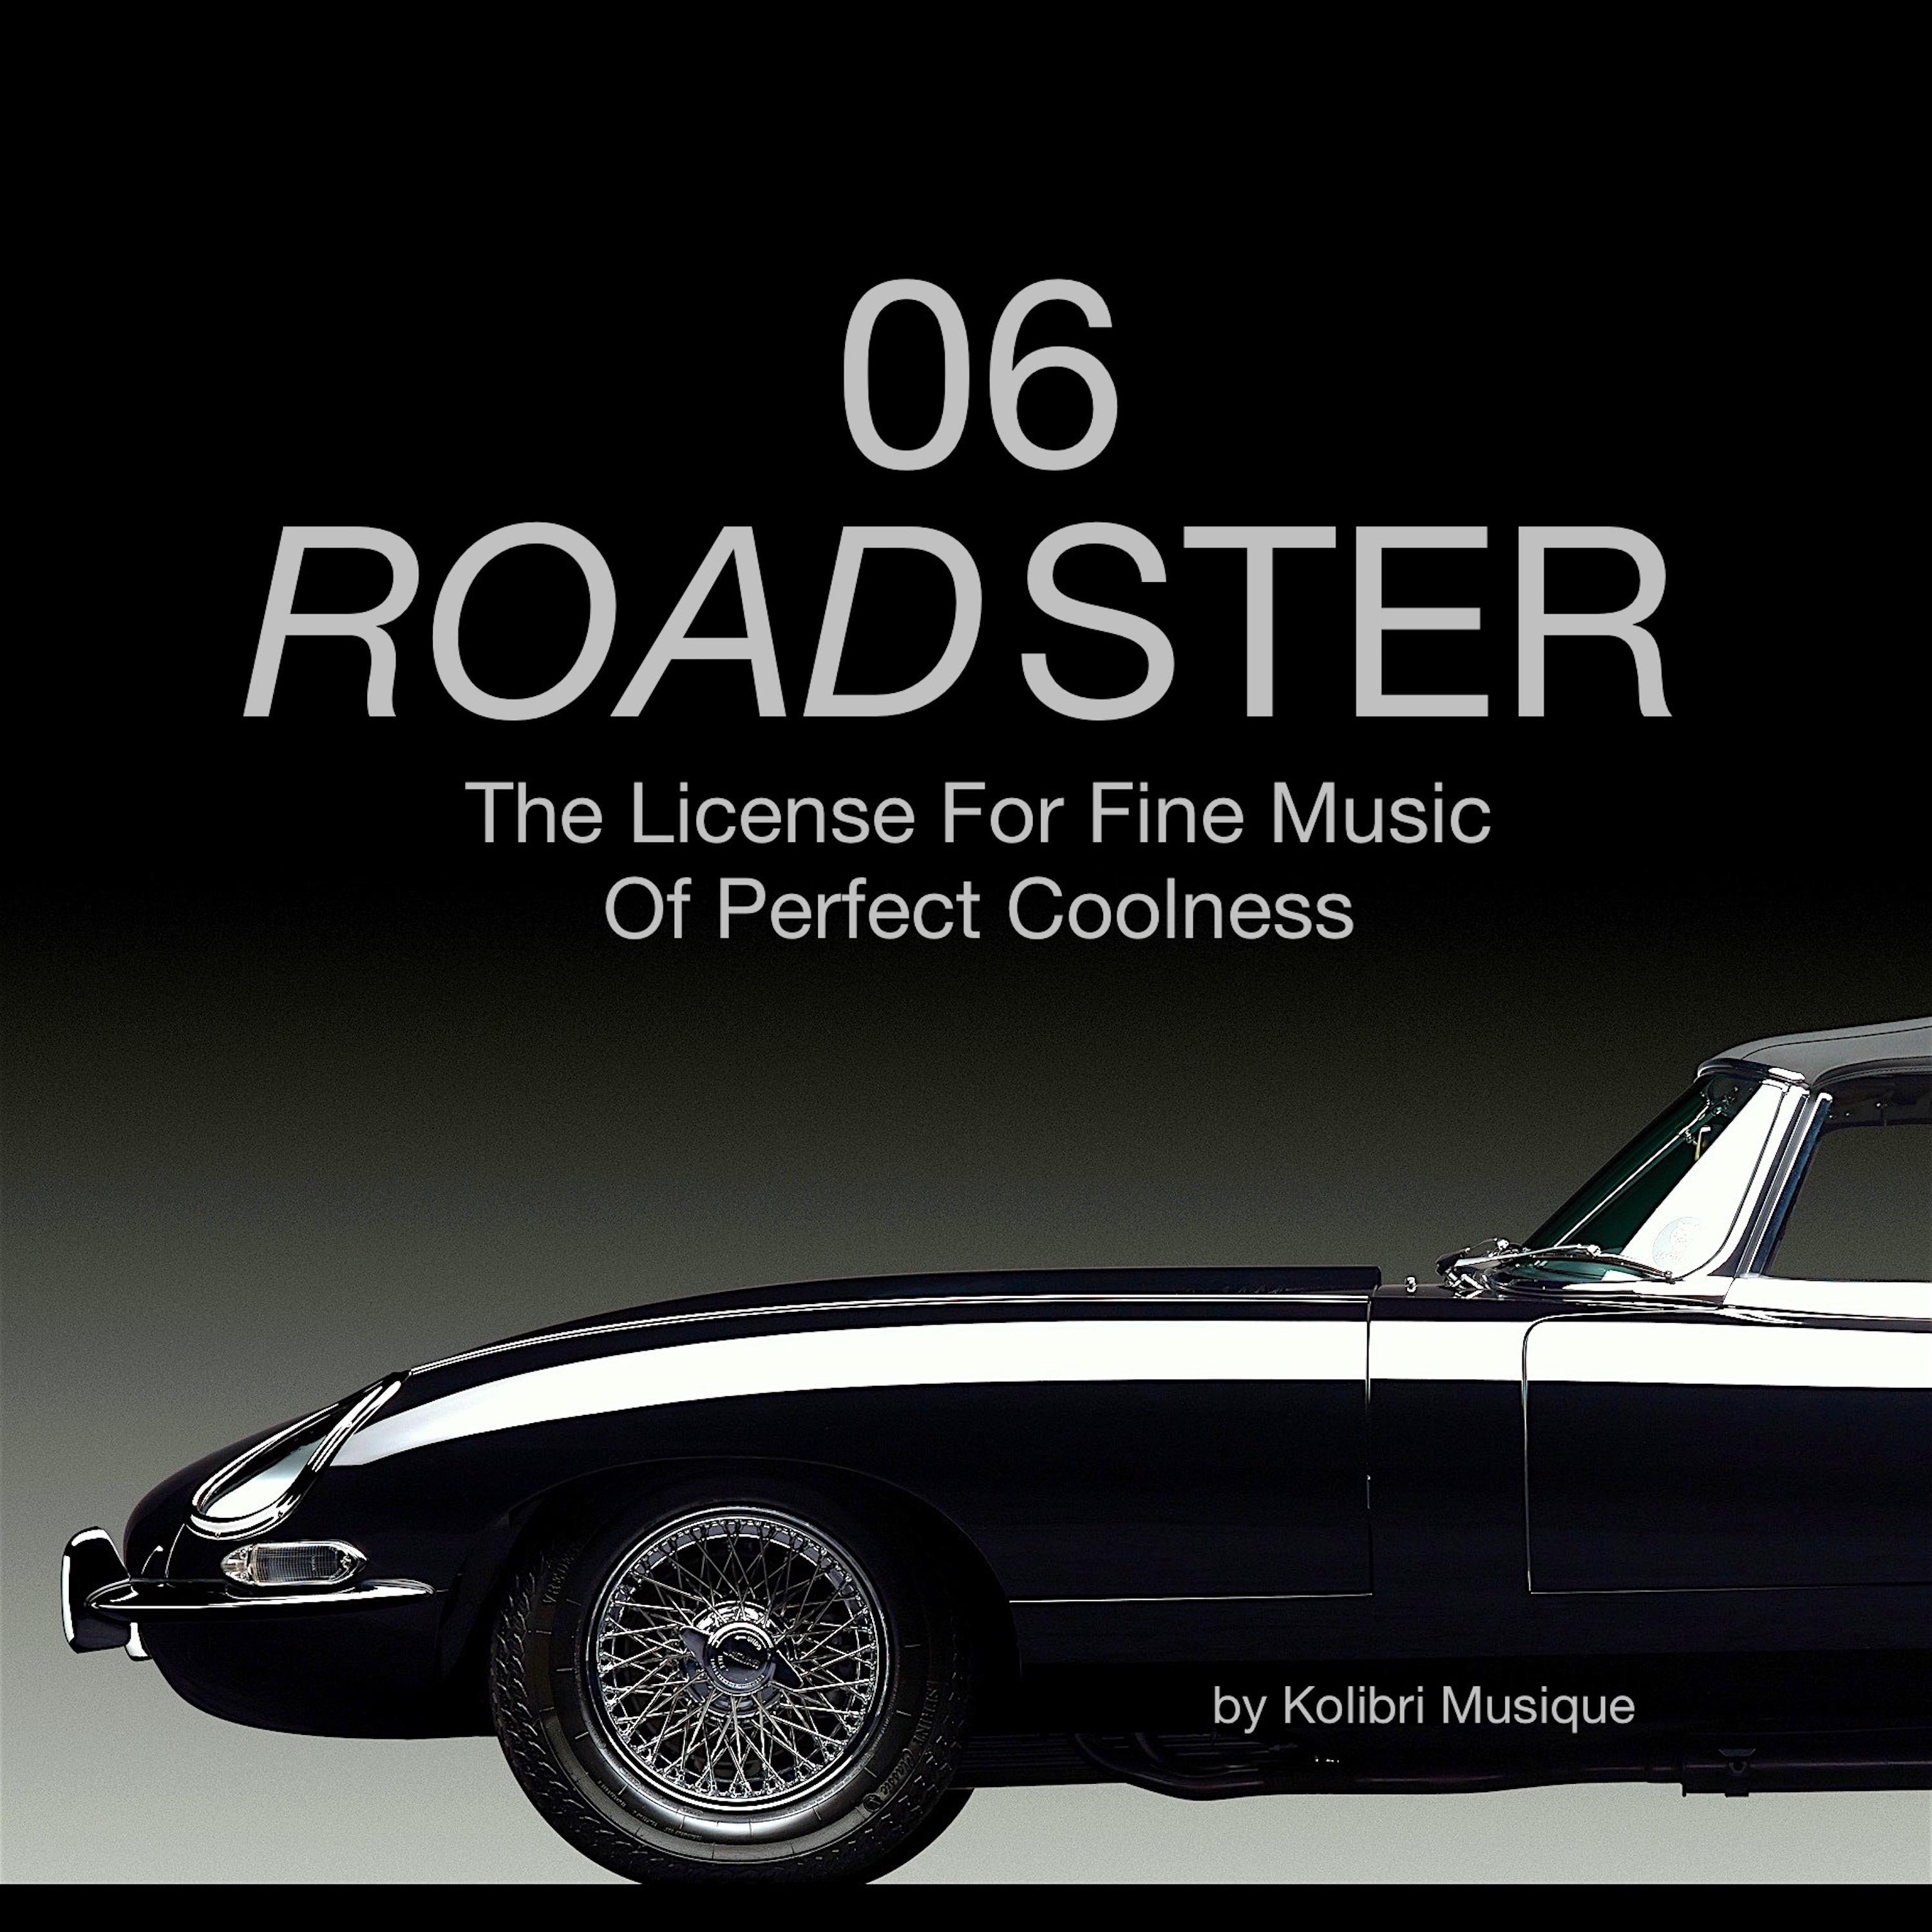 Roadster 06 - The License for Fine Music of Perfect Coolness - Presented by Kolibri Musique